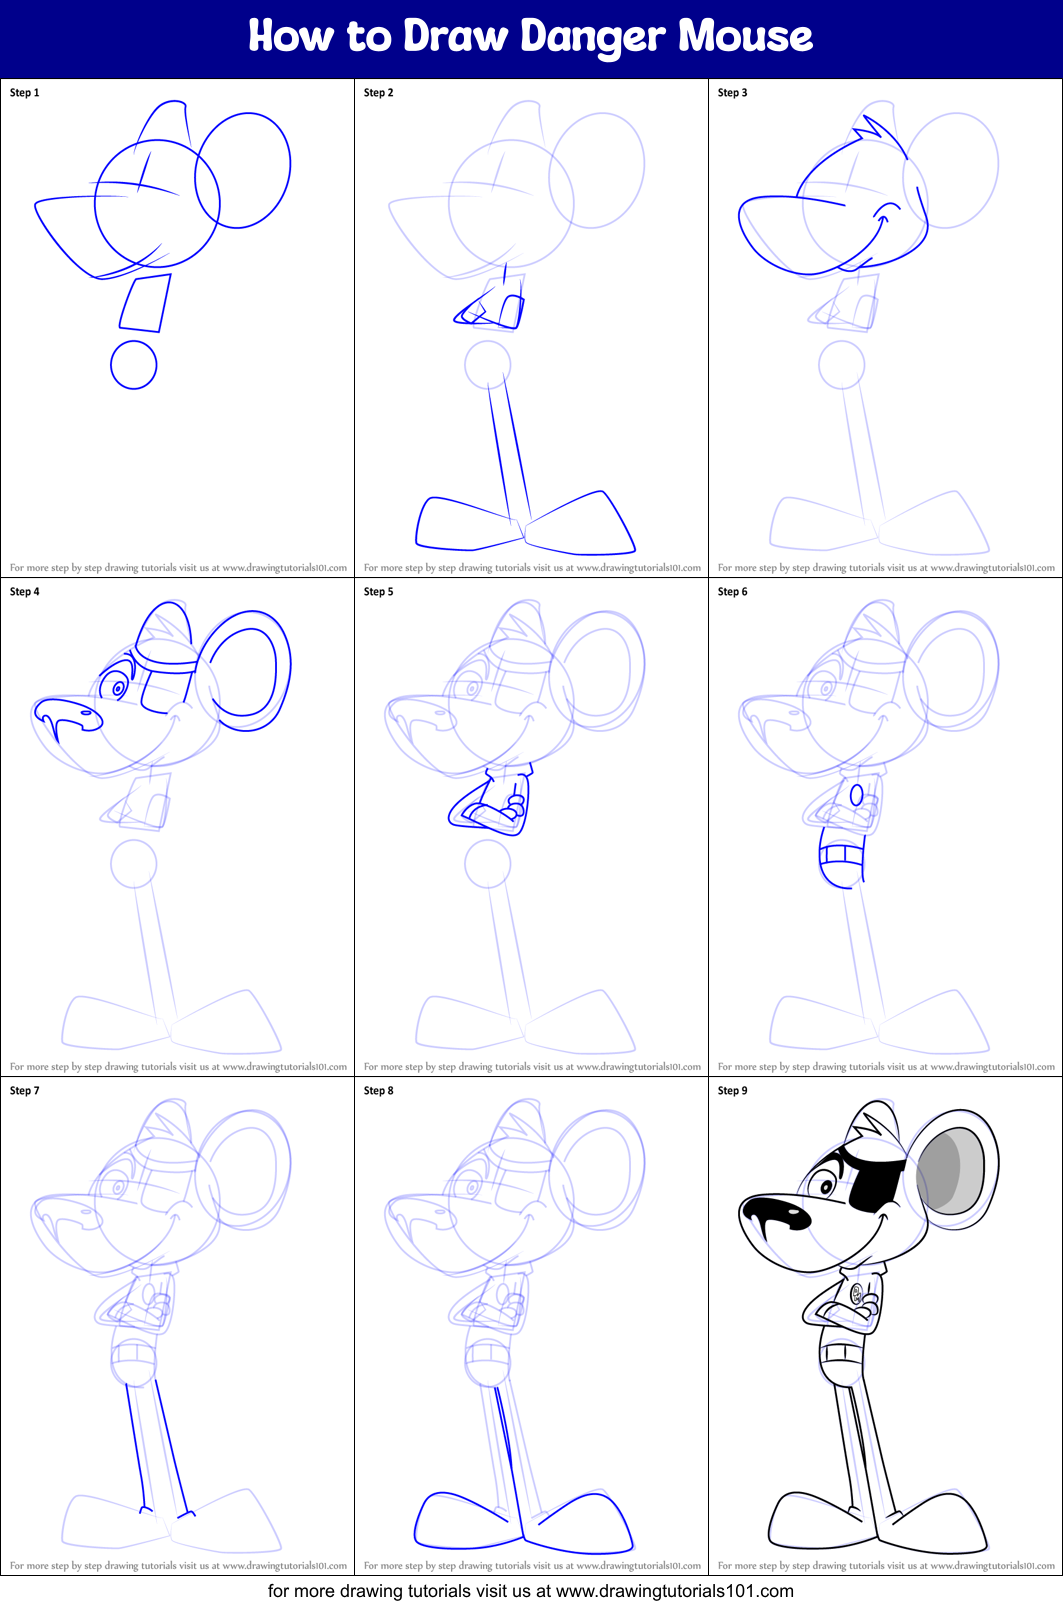 How to Draw Danger Mouse printable step by step drawing sheet